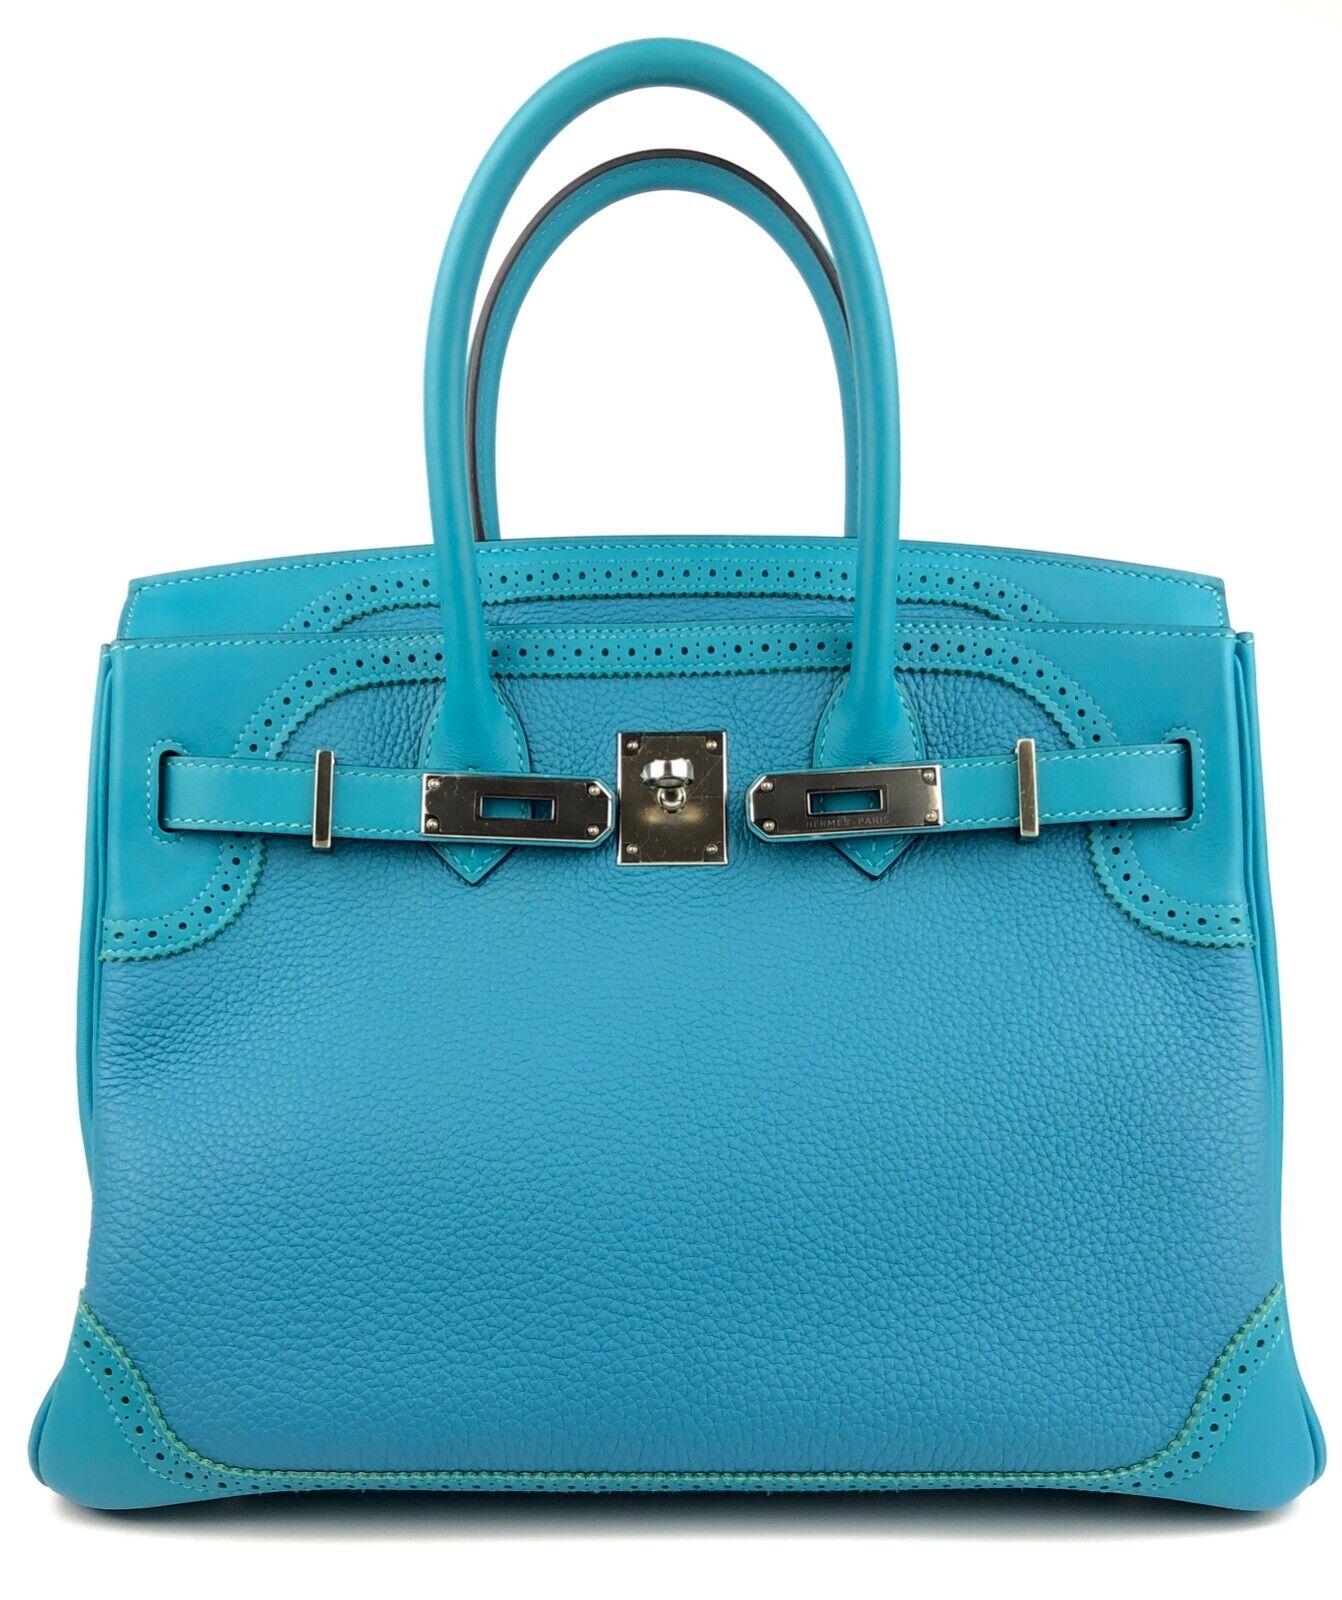 Hermes Birkin 30 Ghillies Turquoise Blue Leather Palladium Hardware  In Excellent Condition For Sale In Miami, FL